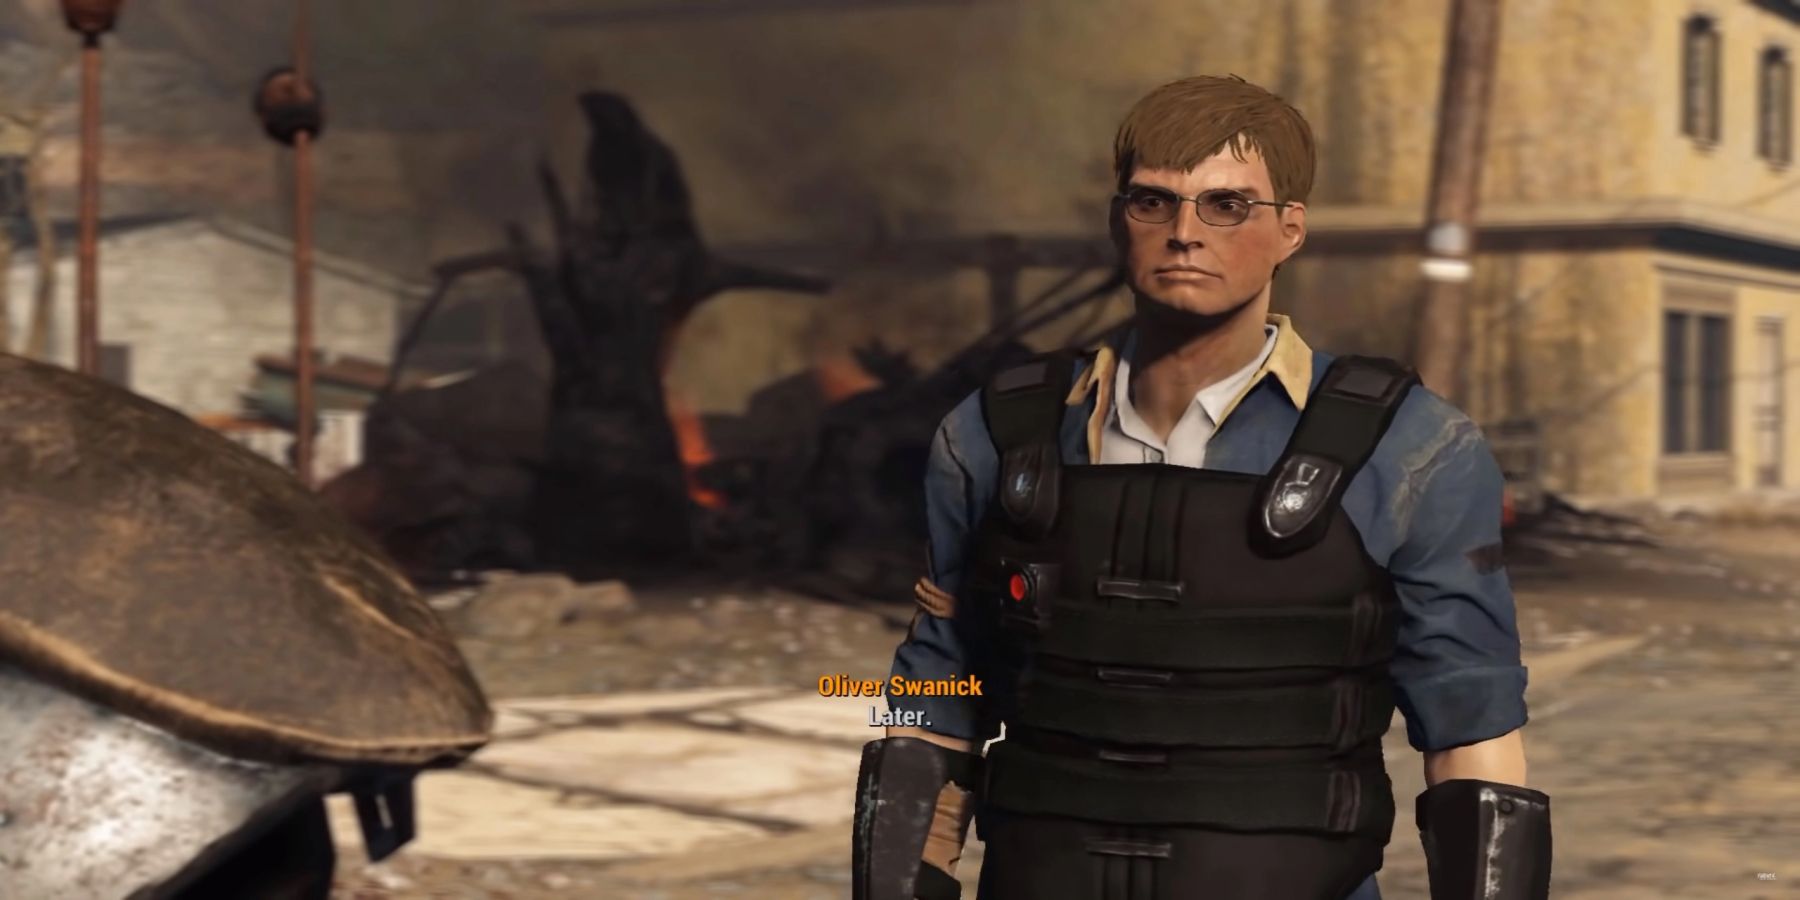 Fallout 4 New Vegas Remake Gets New Footage 2 Years After Previous Trailer